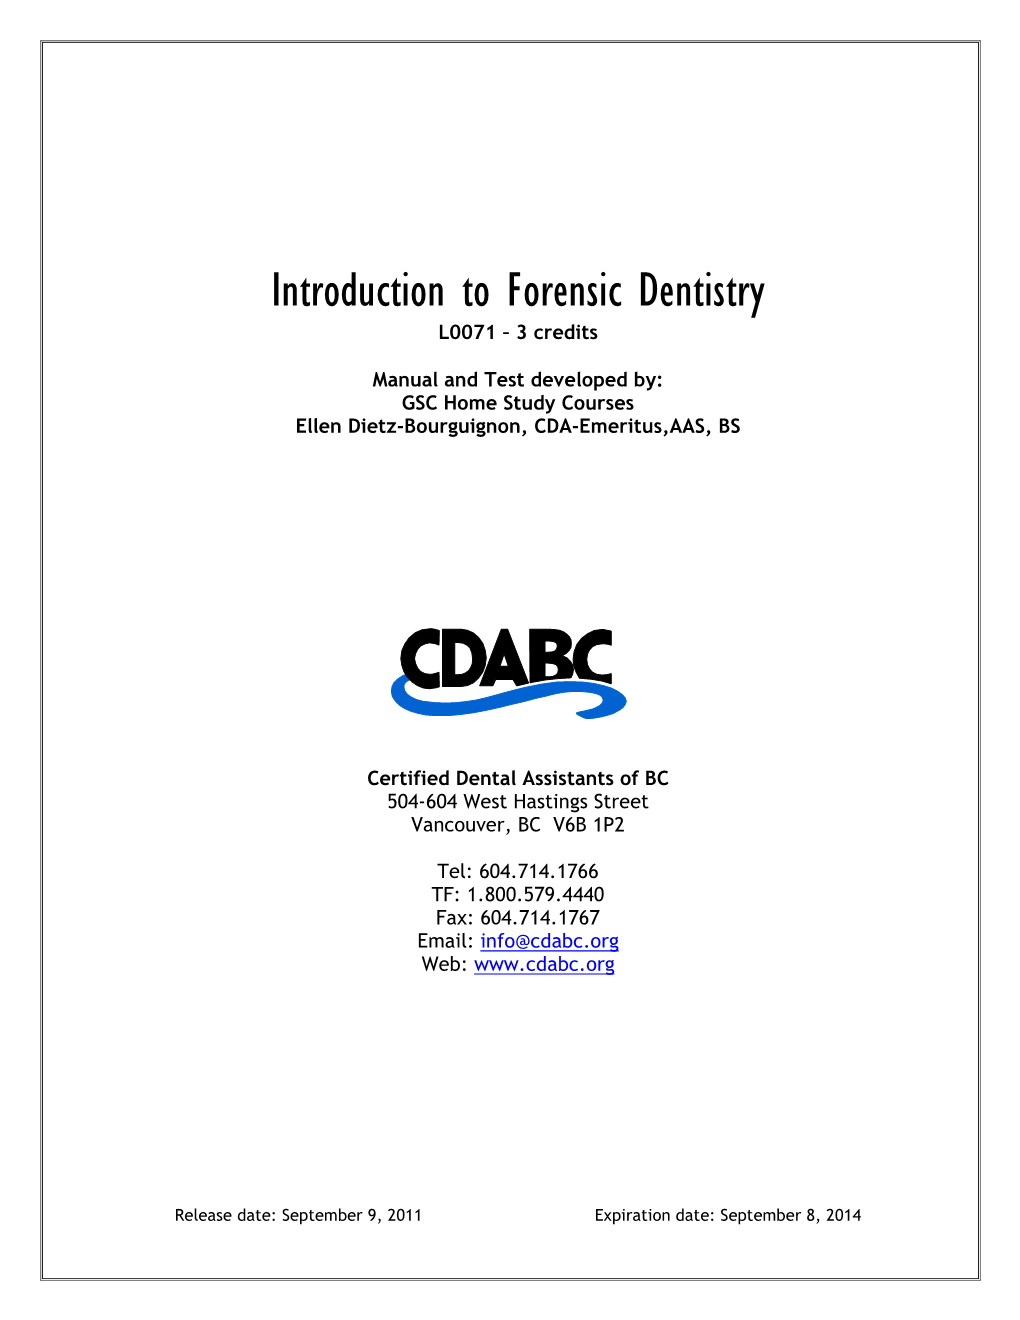 Introduction to Forensic Dentistry L0071 – 3 Credits